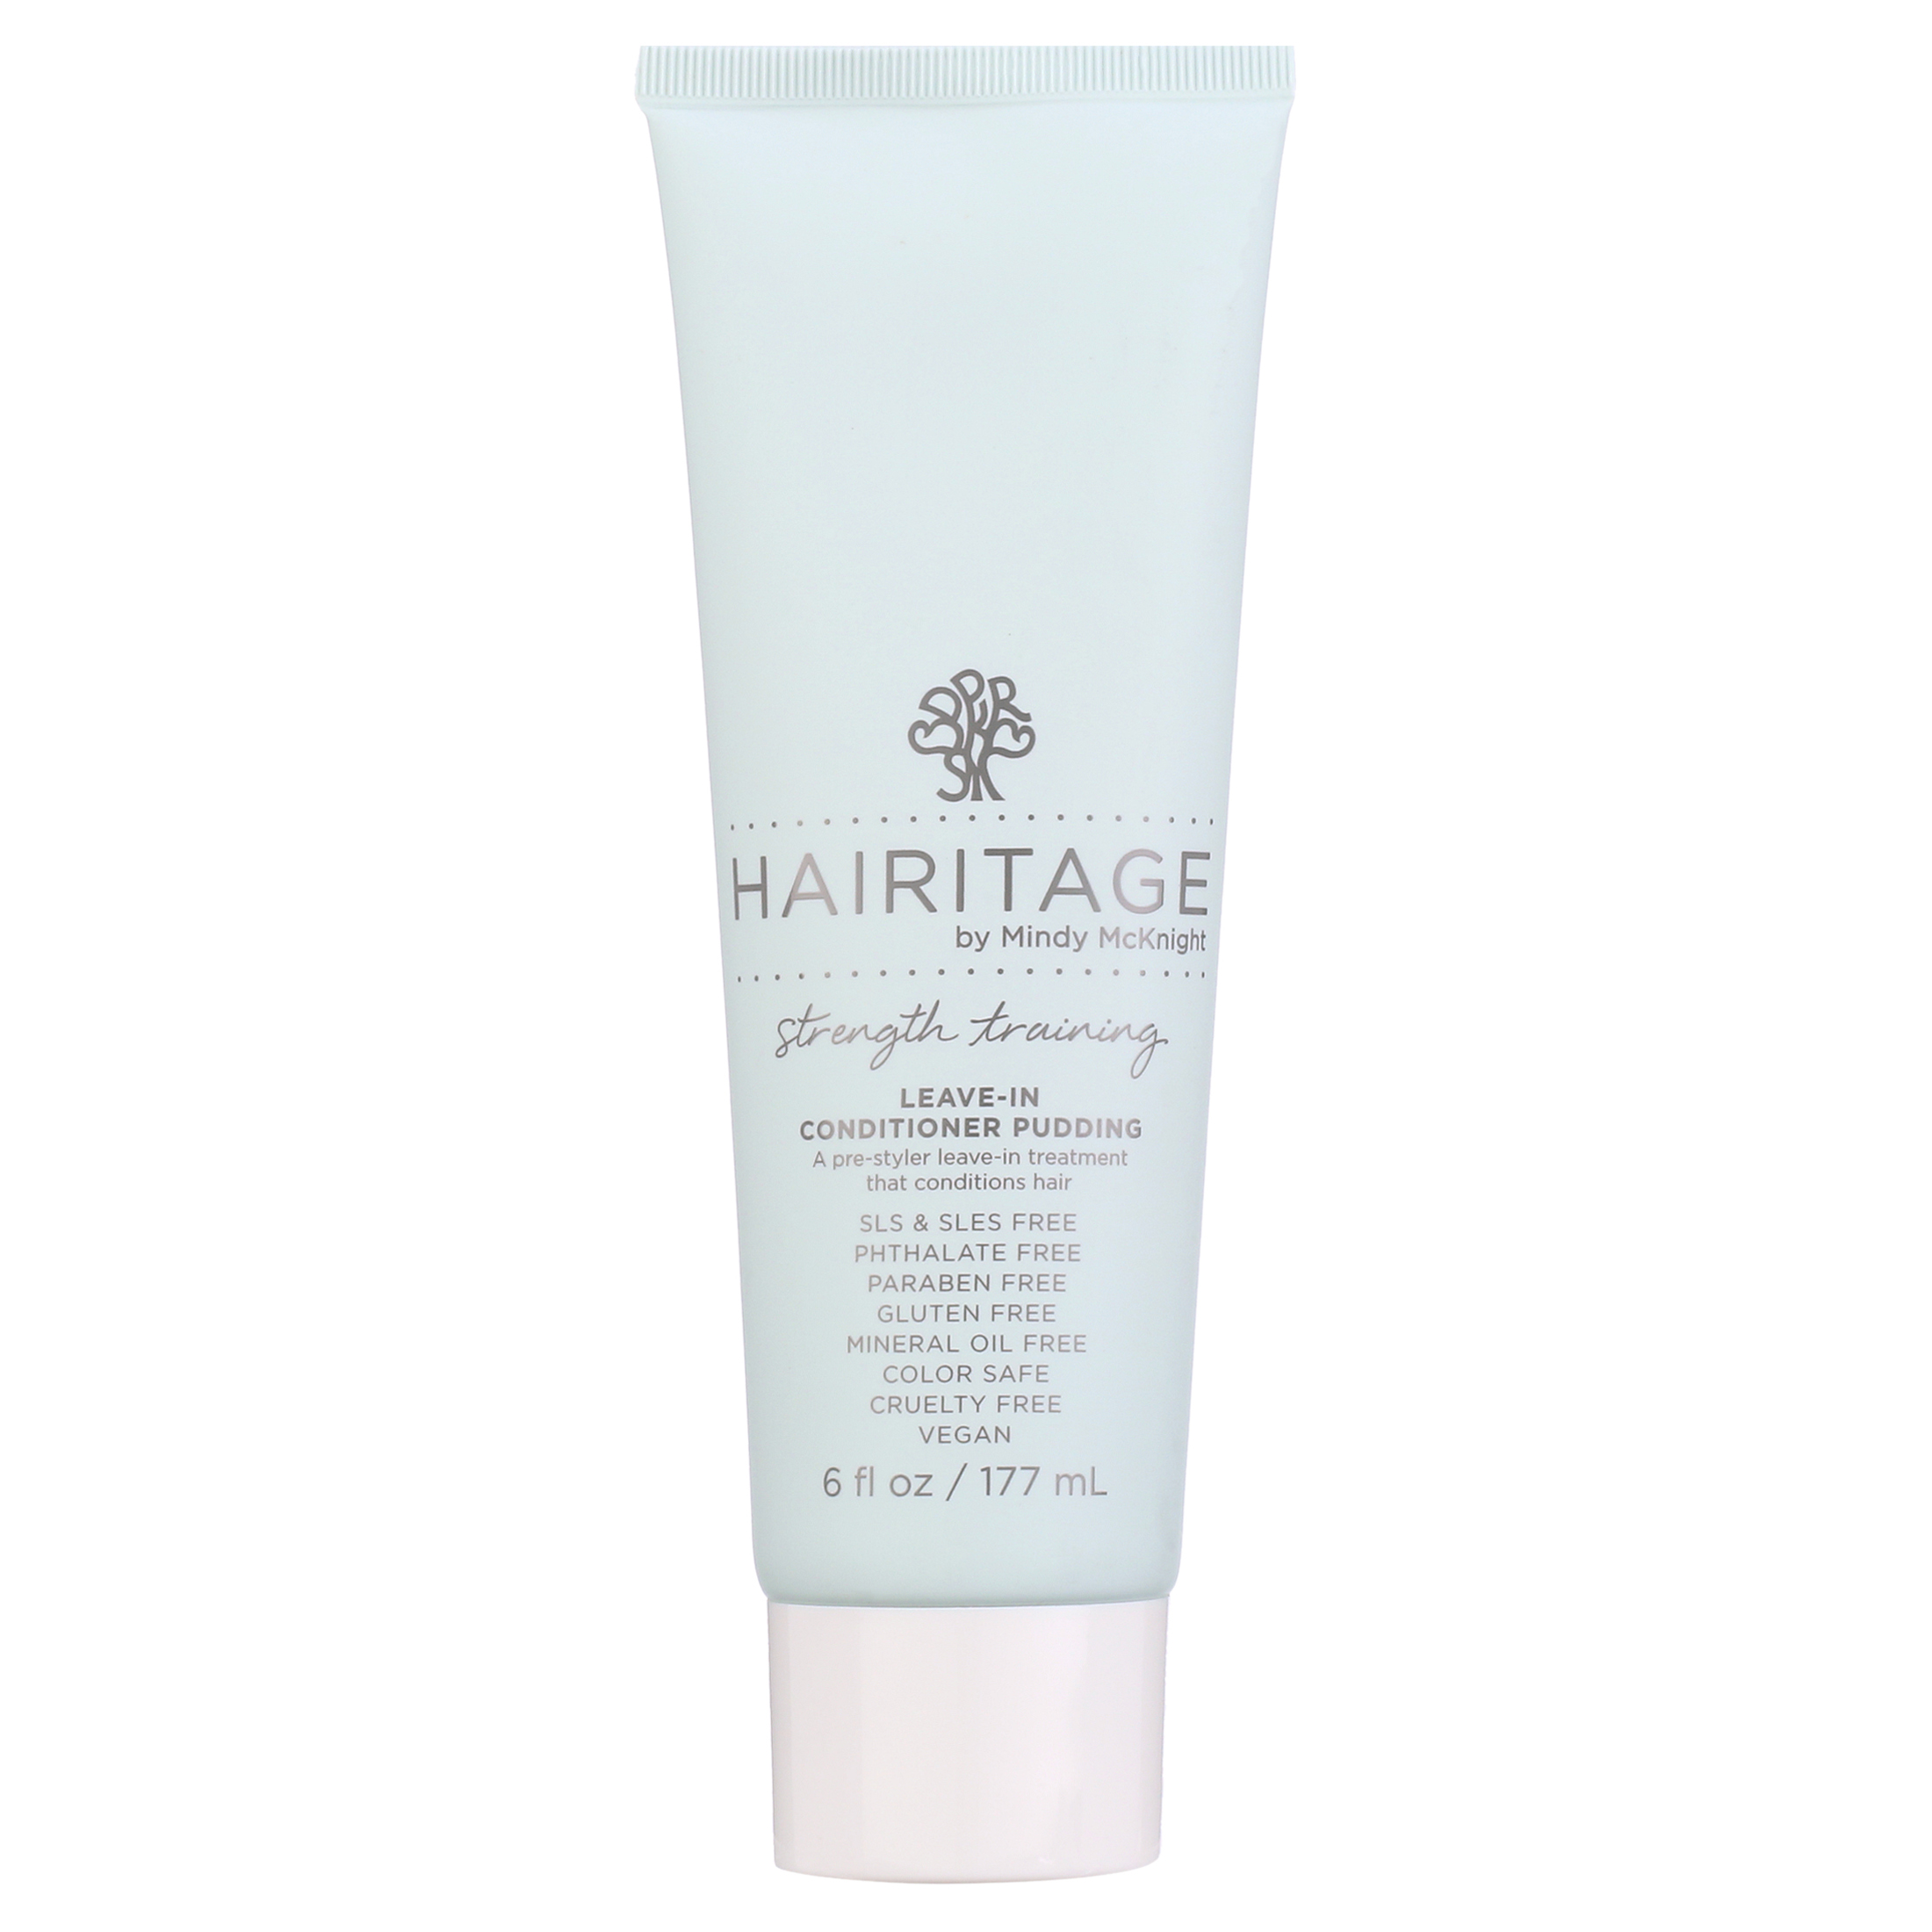 Hairitage Strength Training Thickening Leave-in Conditioner with Coconut oil, 6 fl oz - image 1 of 7